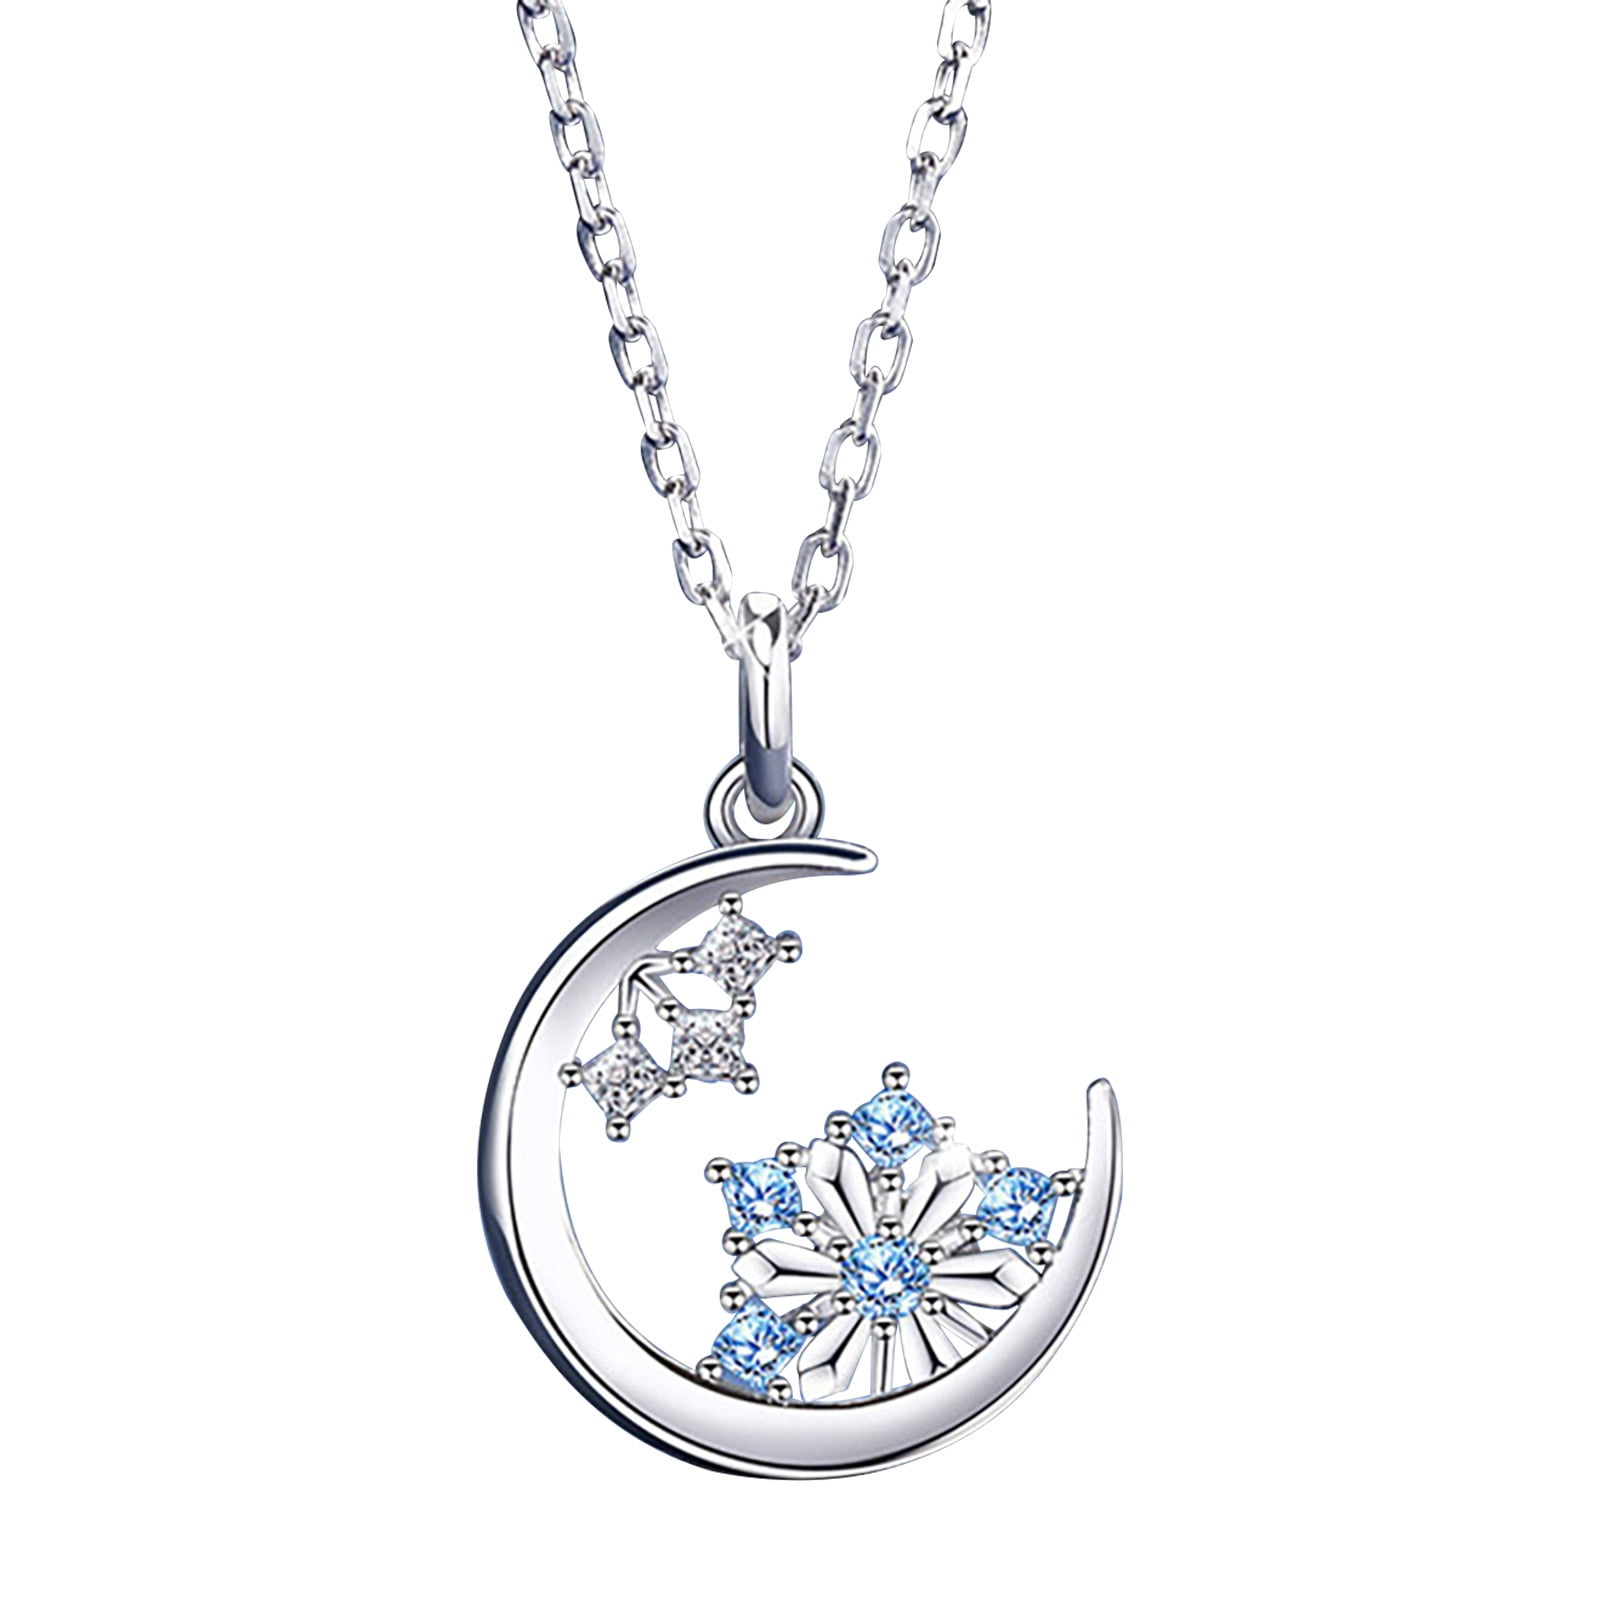 Fashion Womens Silver Plated Snowflake Crystal Lucky Pendant Chain Long Necklace 